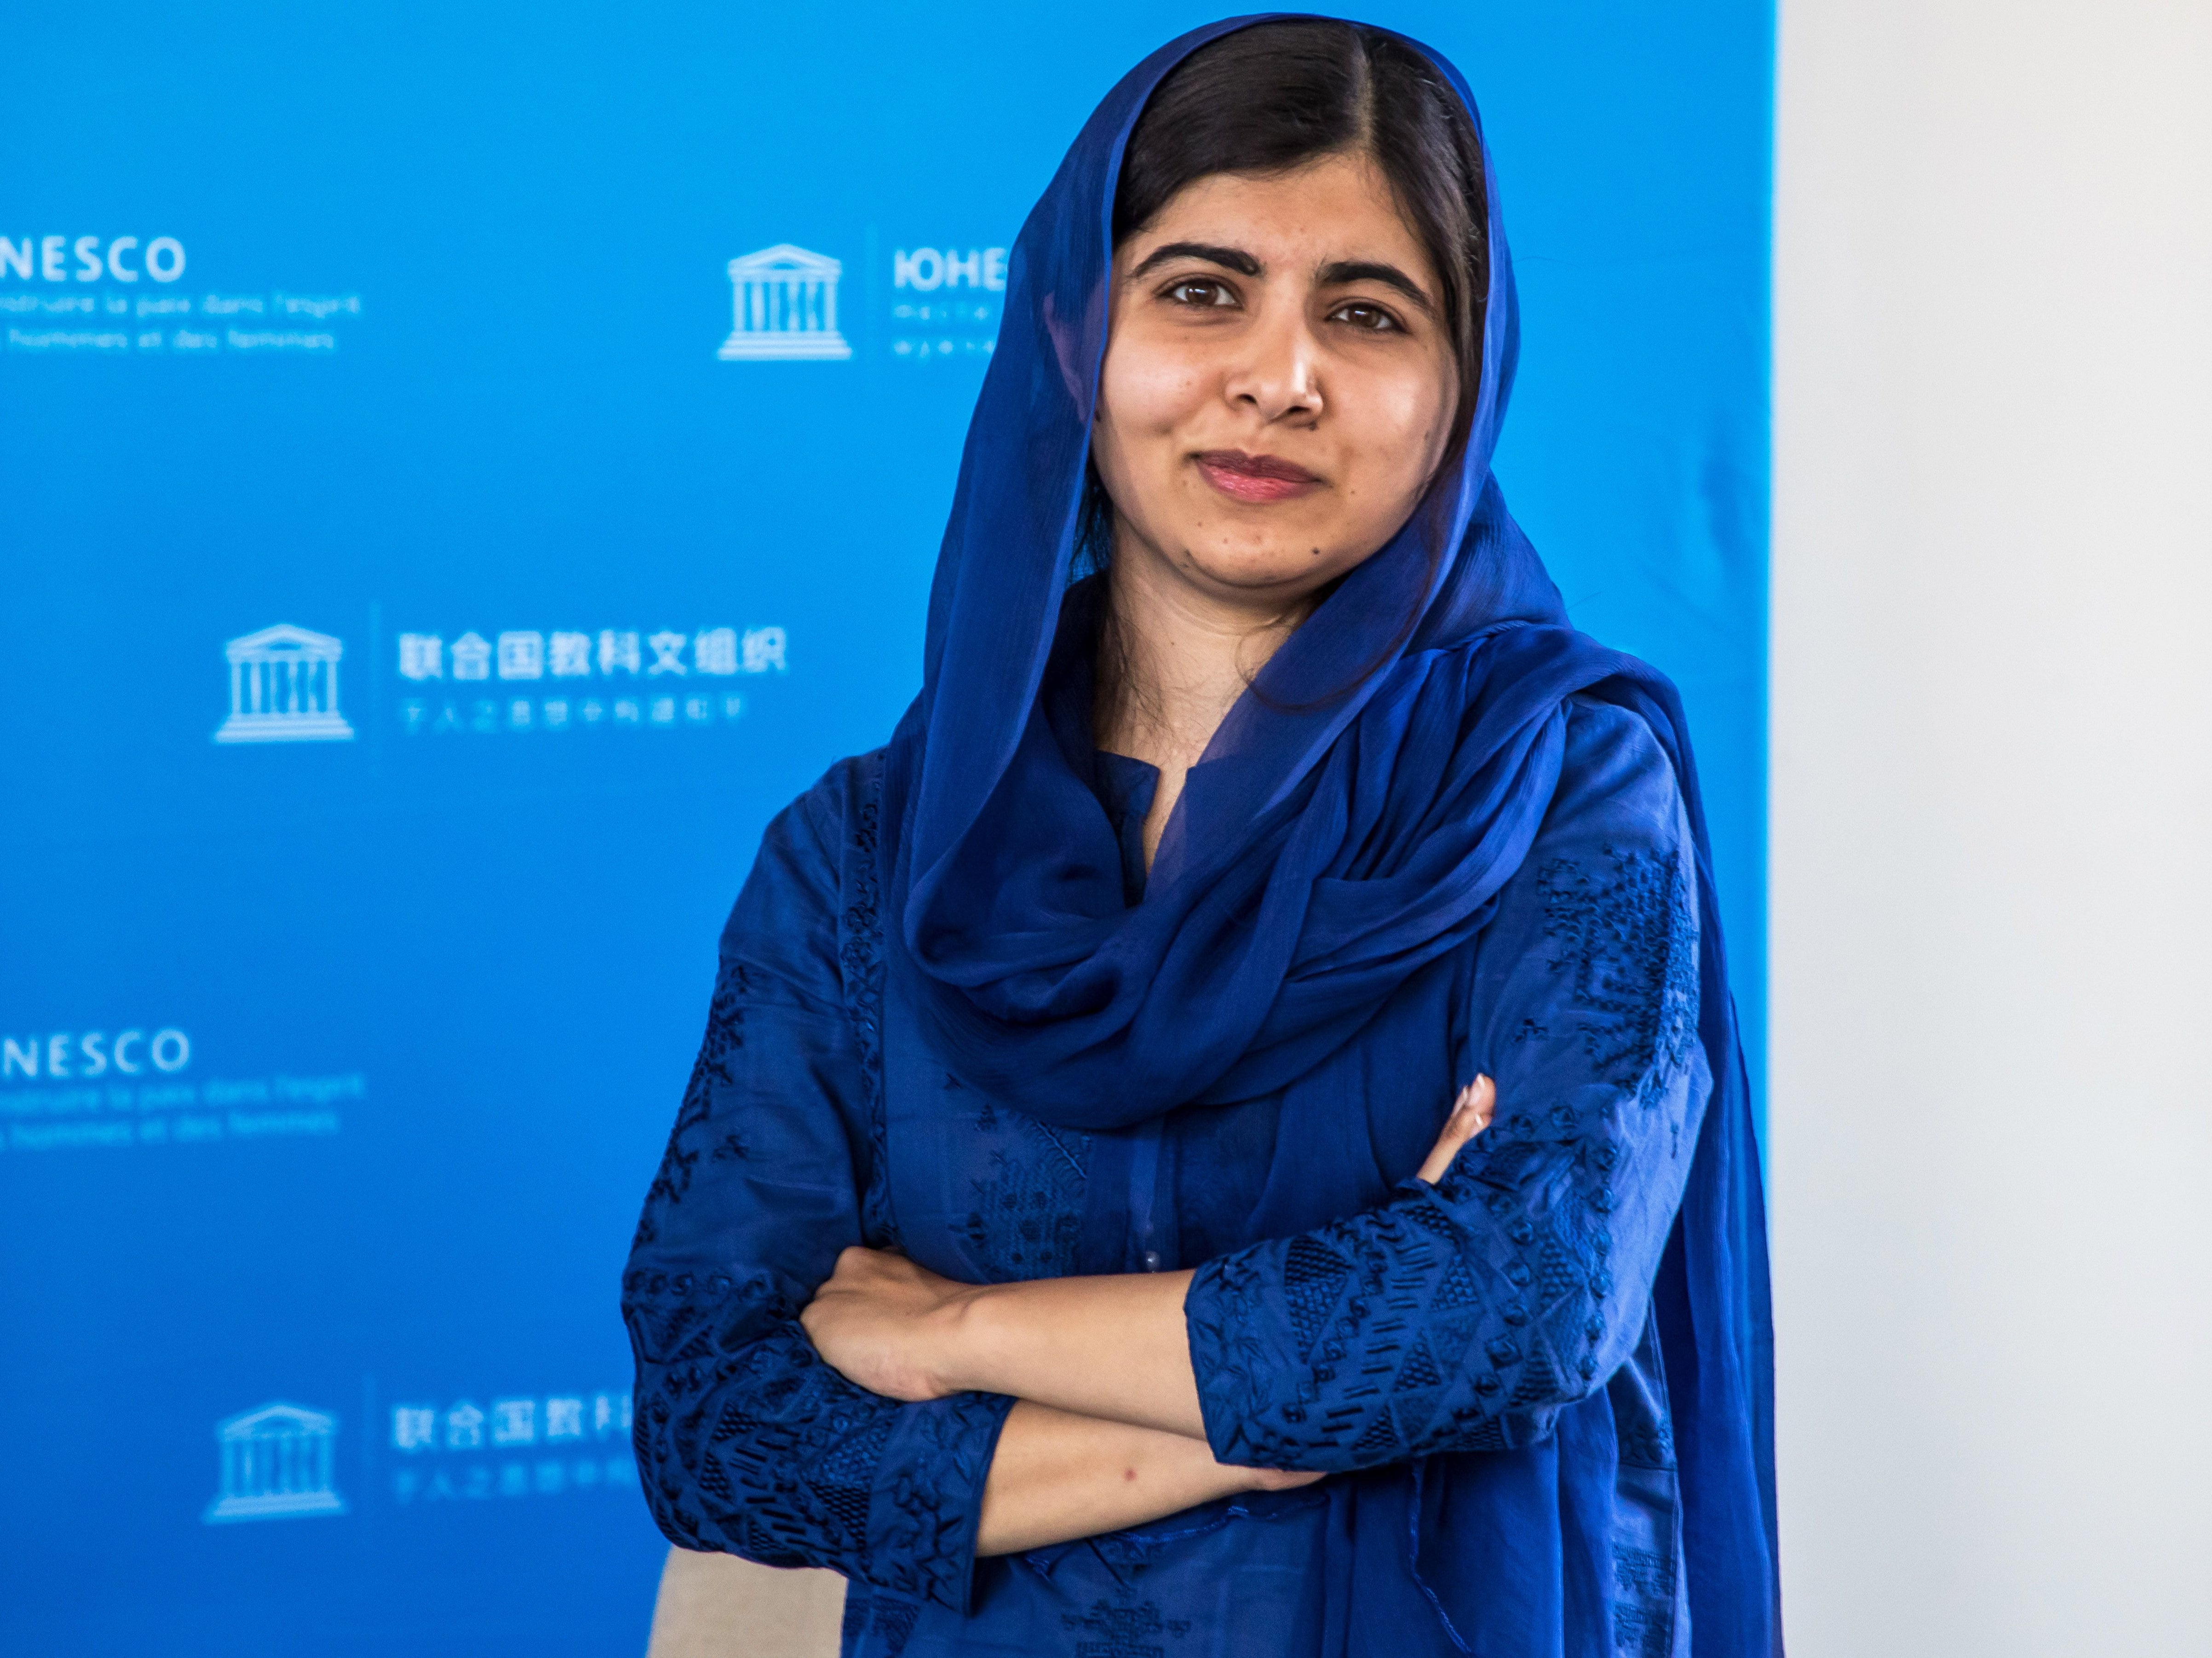 Ms Yousafzai became the youngest Nobel Peace Prize laureate in 2014